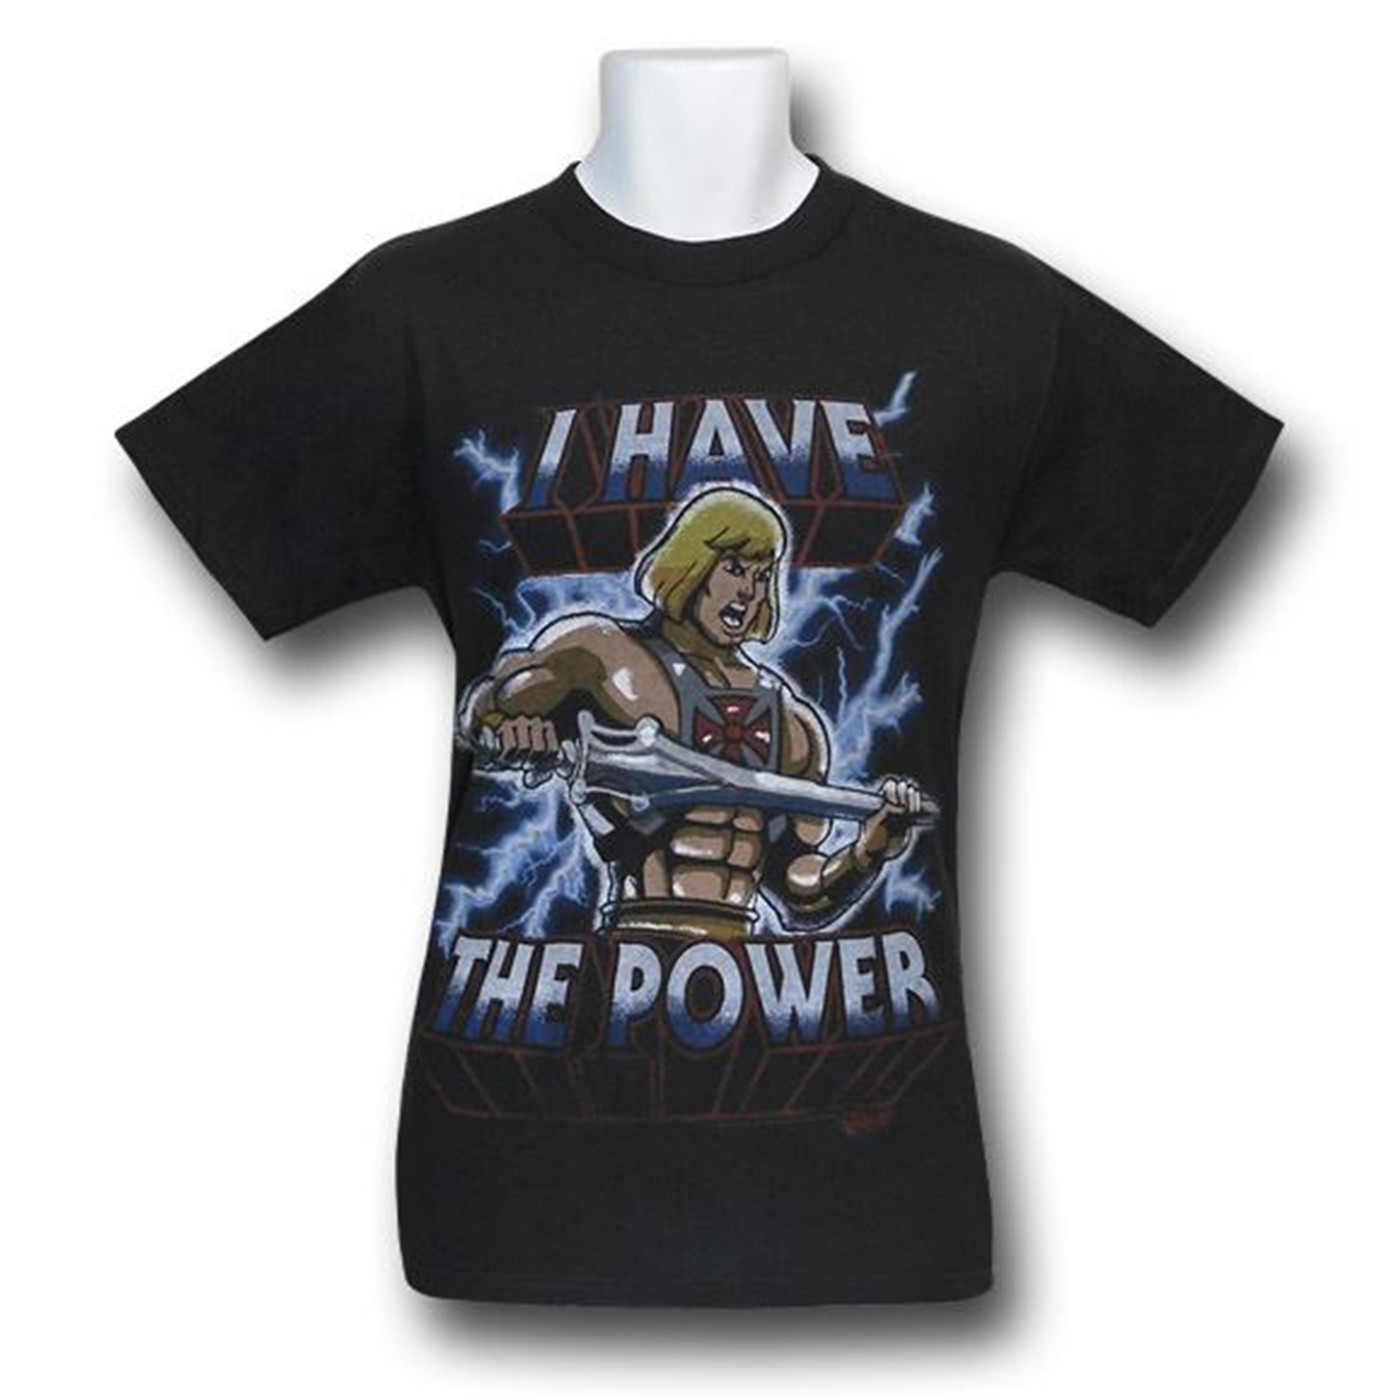 He-Man "I Have The Power" Electric T-Shirt